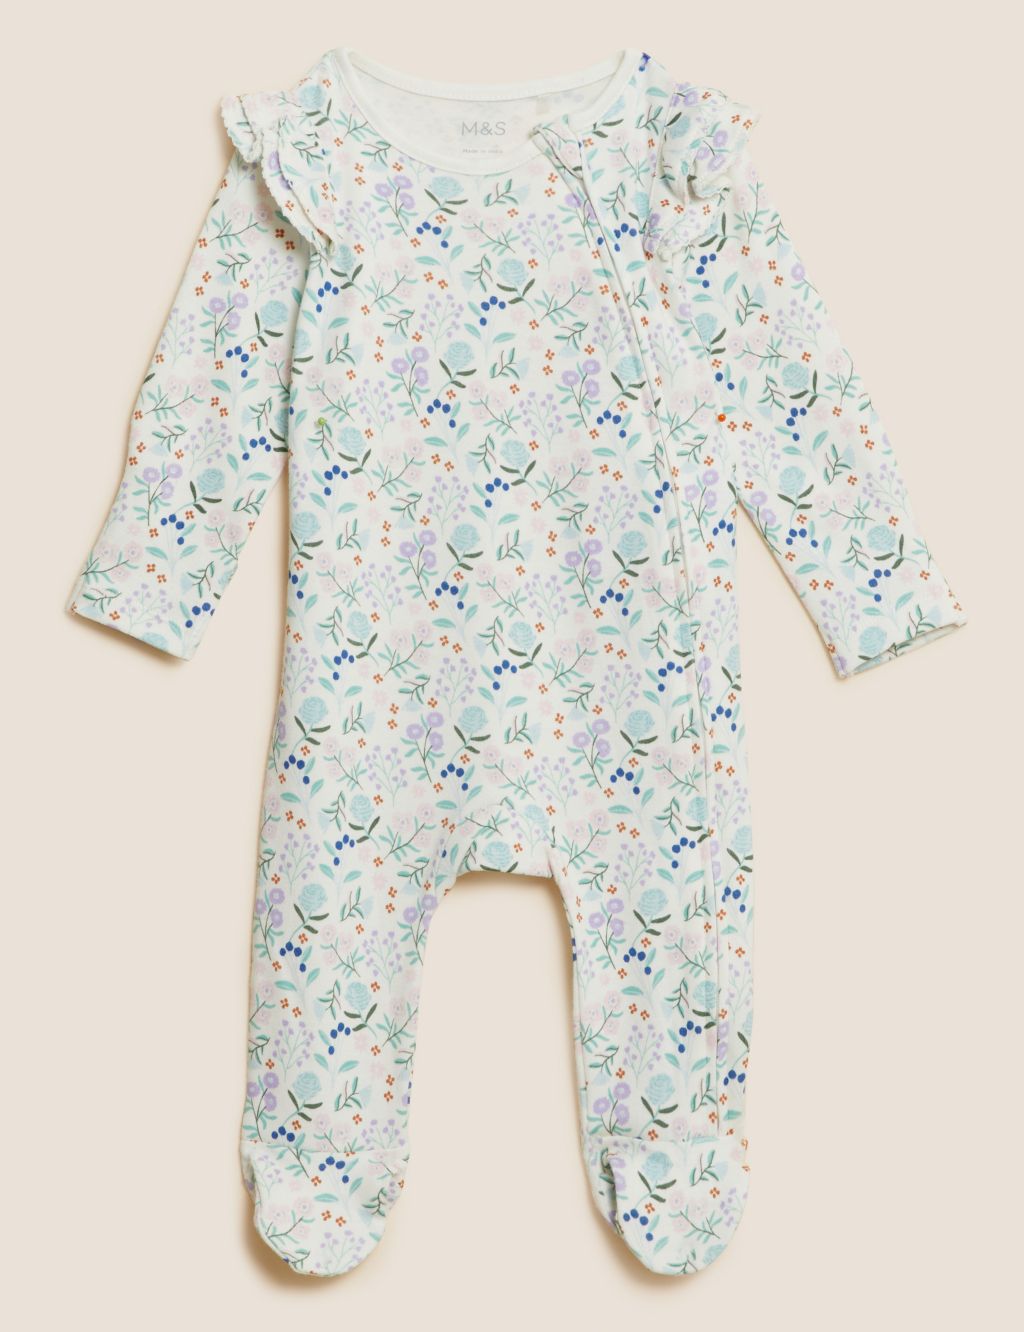 2pk Pure Cotton Floral Frill Sleepsuits (0-3 Yrs) image 2